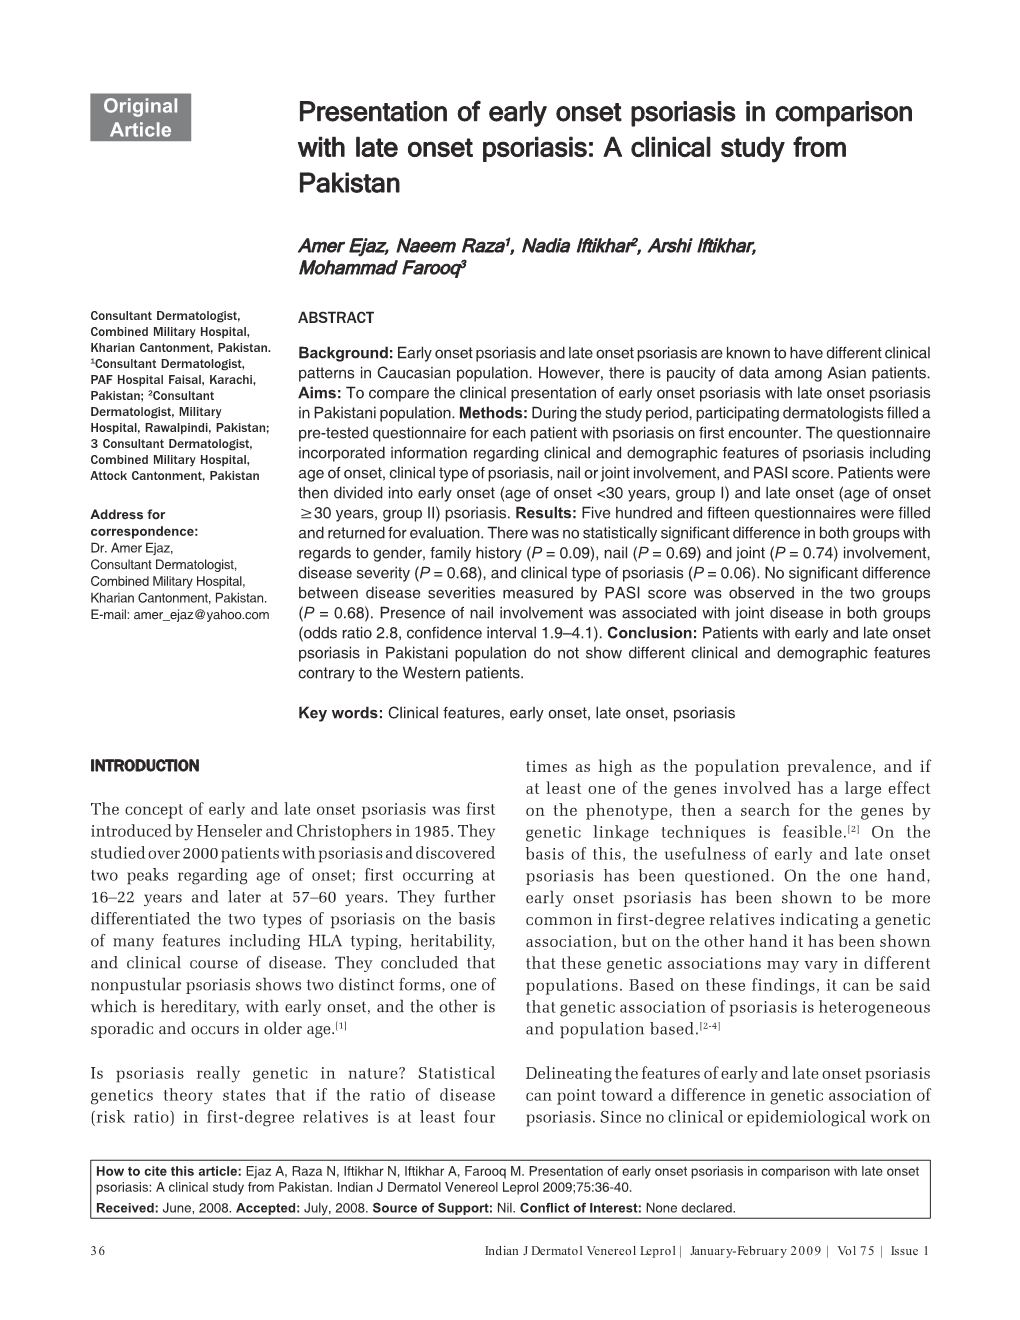 Presentation of Early Onset Psoriasis in Comparison with Late Onset Psoriasis: a Clinical Study from Pakistan